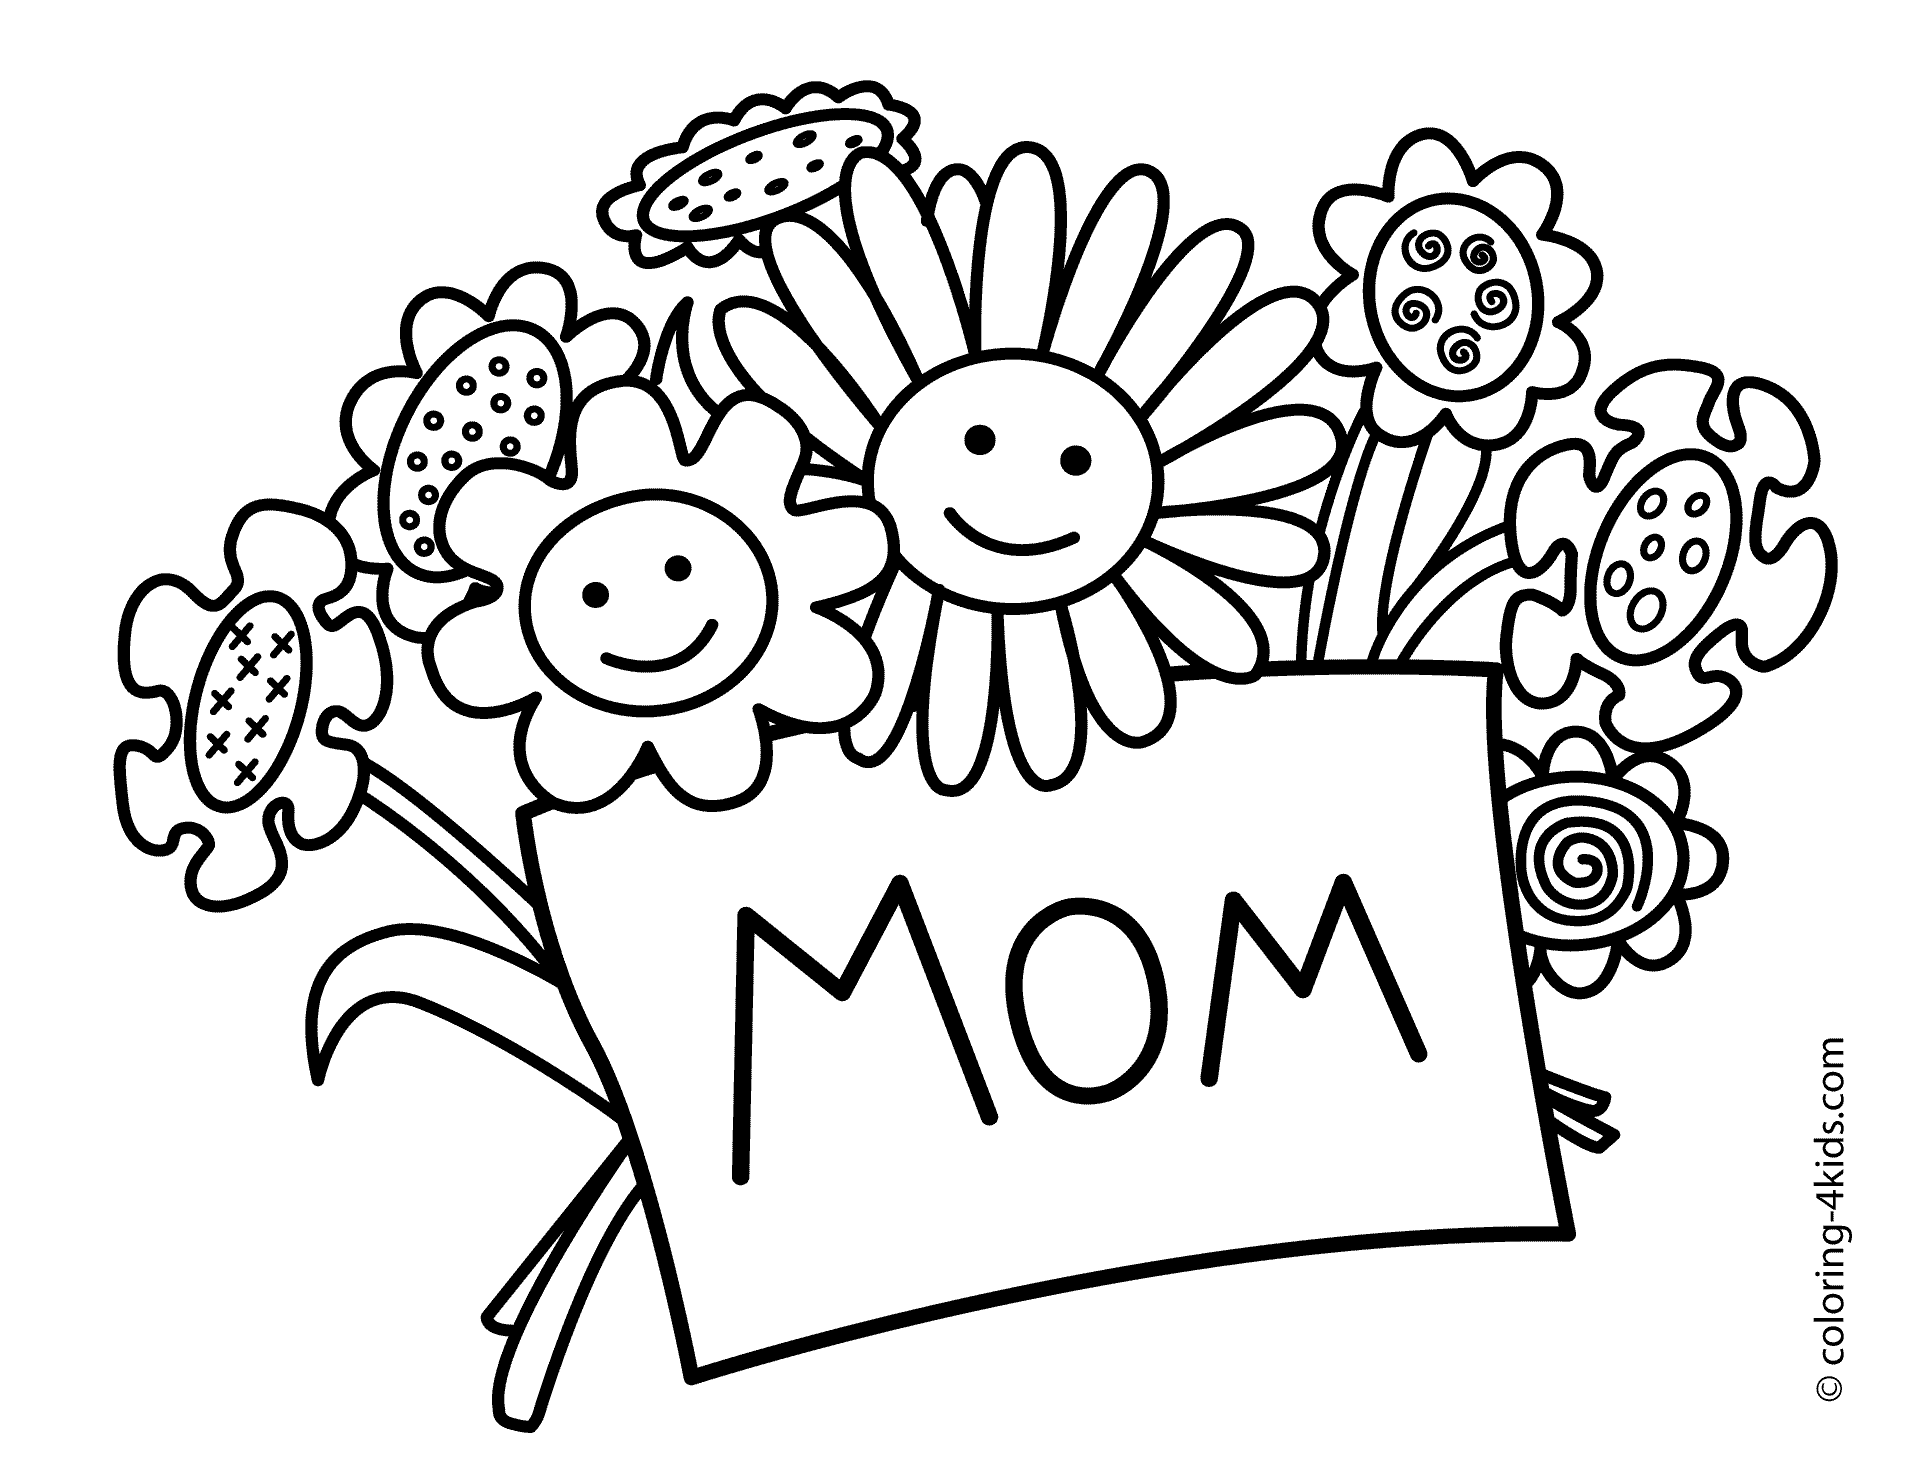 Happy Moms Day Coloring Page Free Printable Coloring Pages For Kids